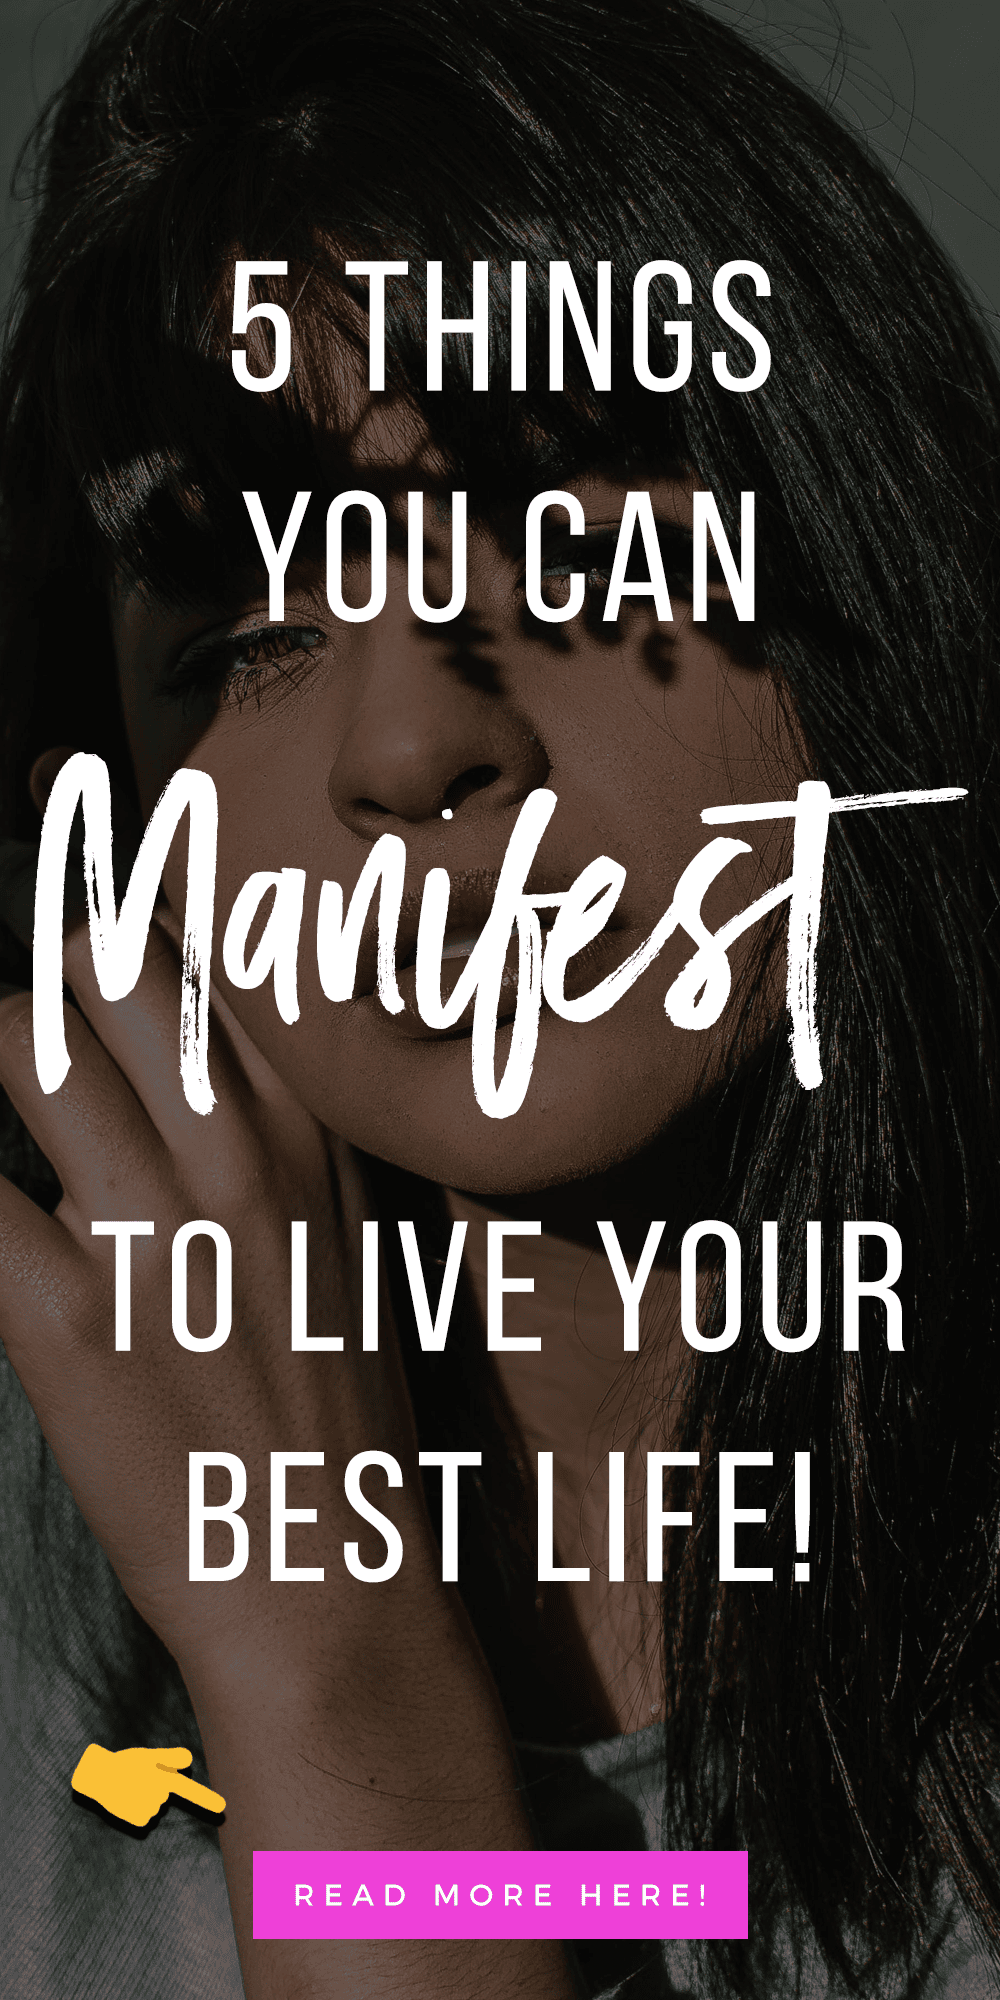 5 Things You Can Manifest To Live Your Best Life